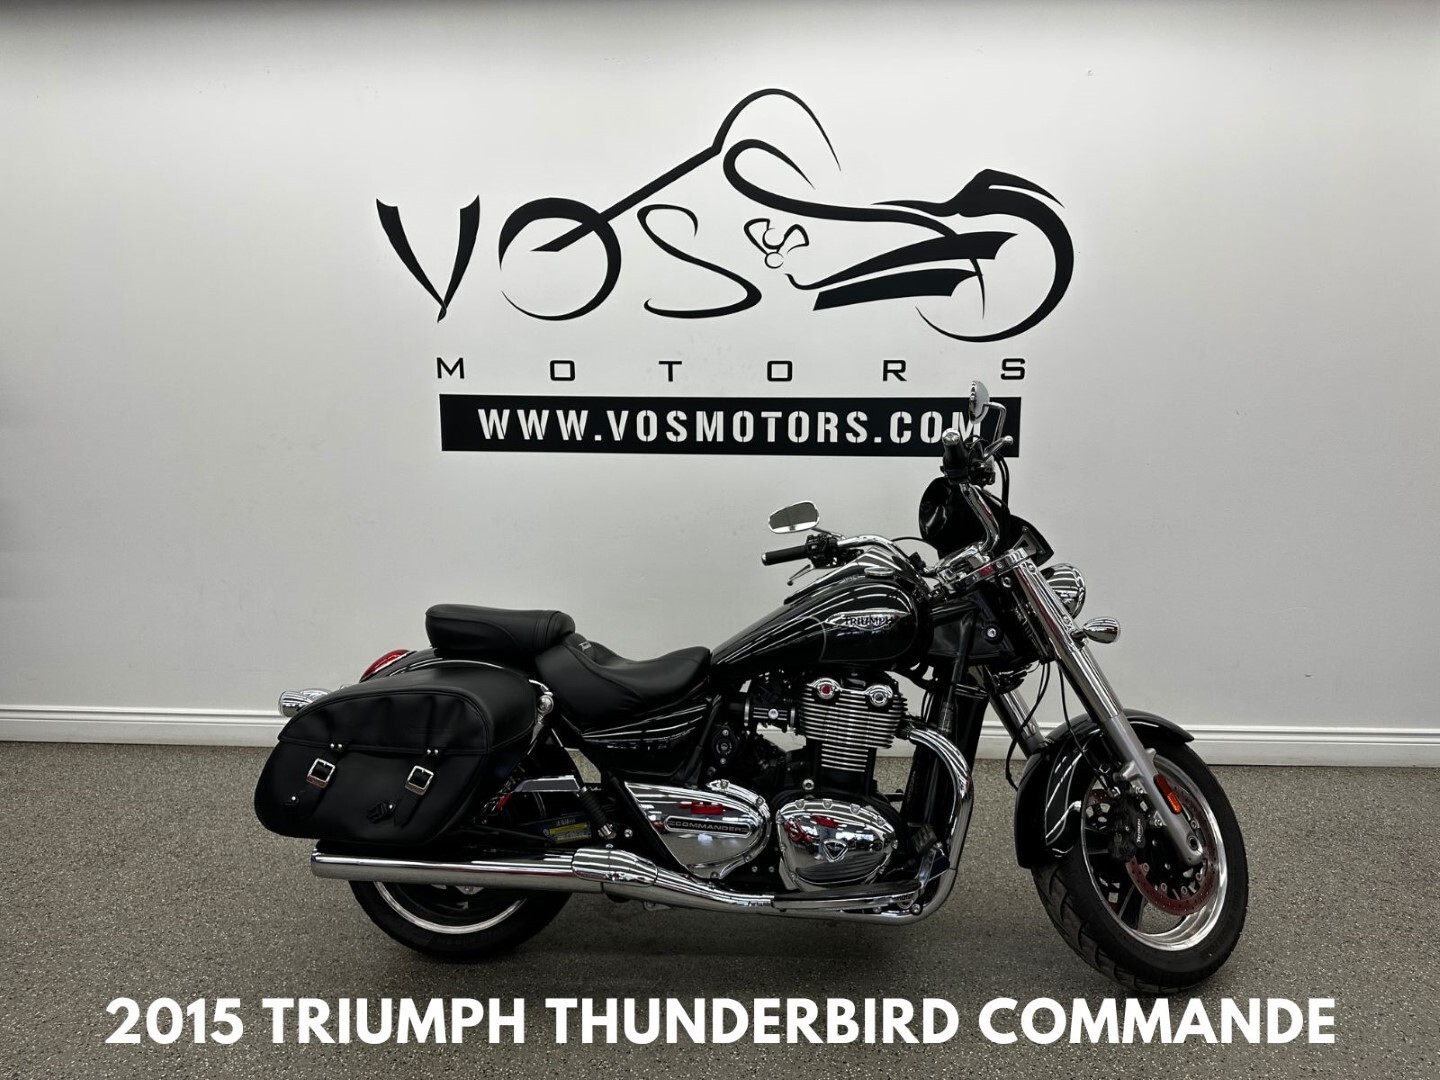 2015 Triumph Thunderbird Commander ABS - V5607NP - -No Payments for 1 Year*